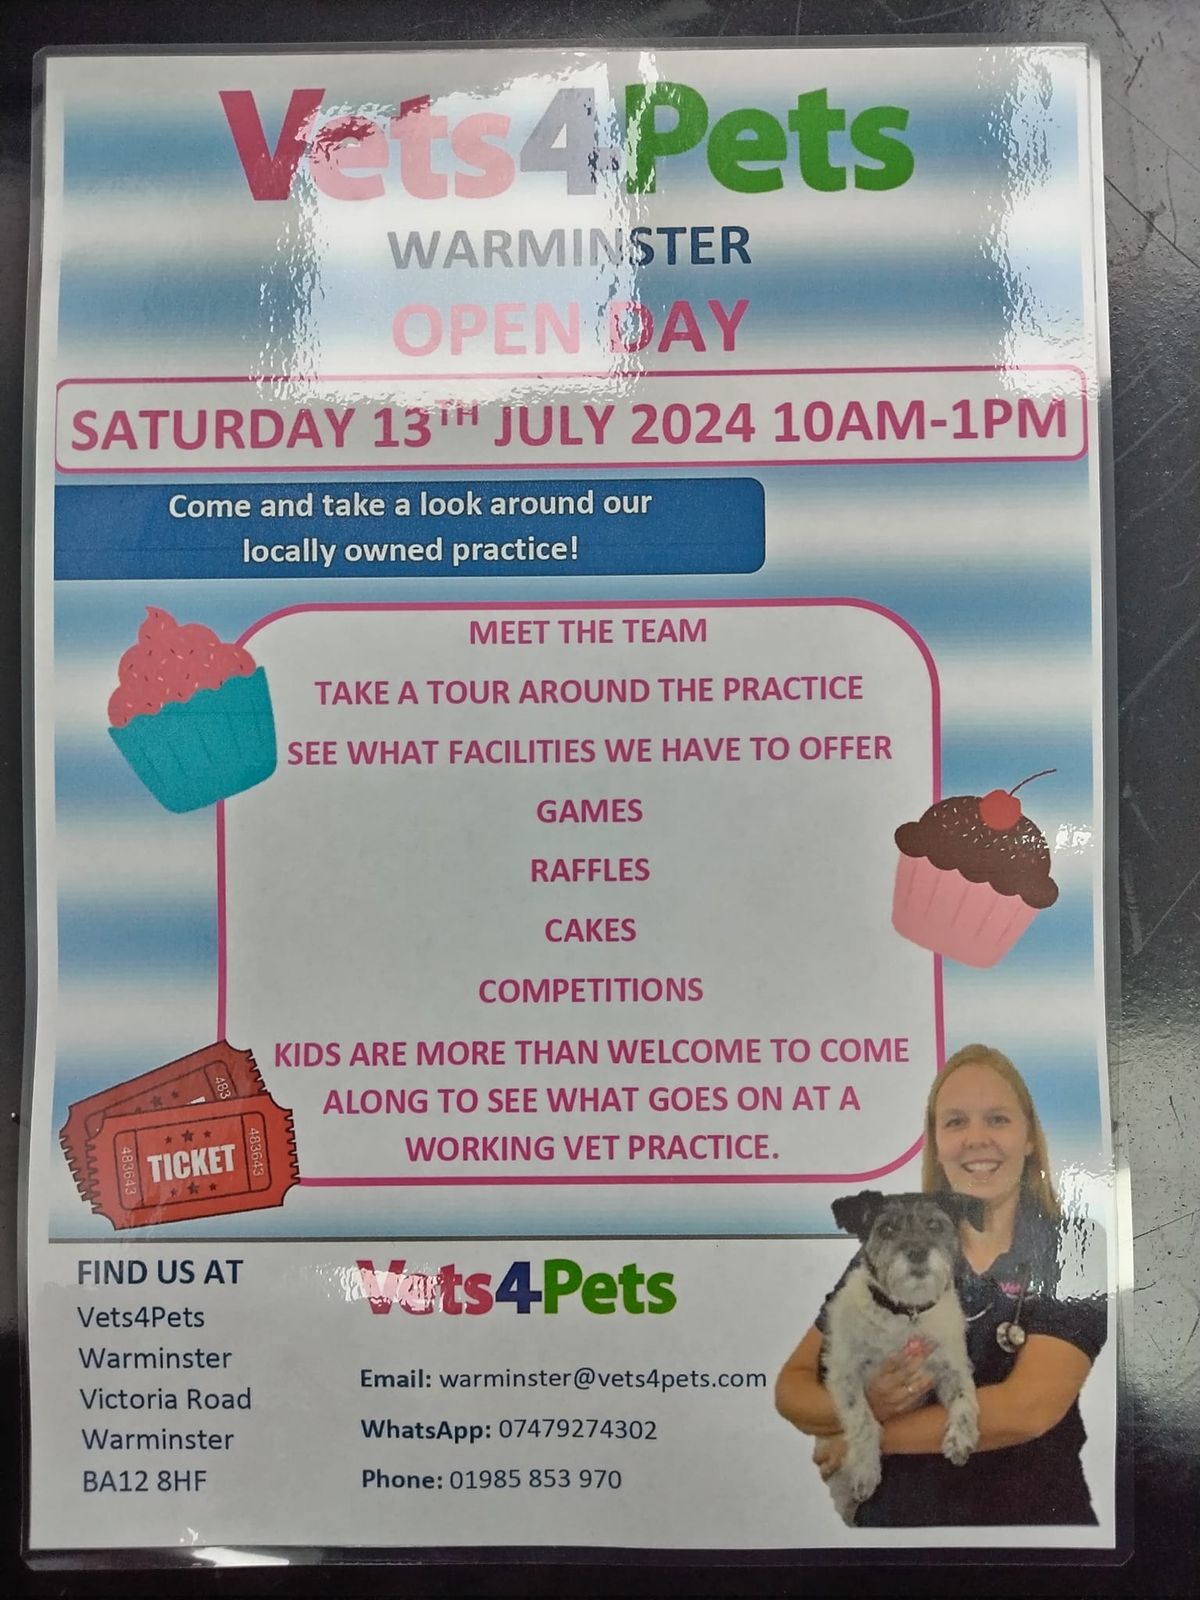 Vets4Pets Warminster Open Day